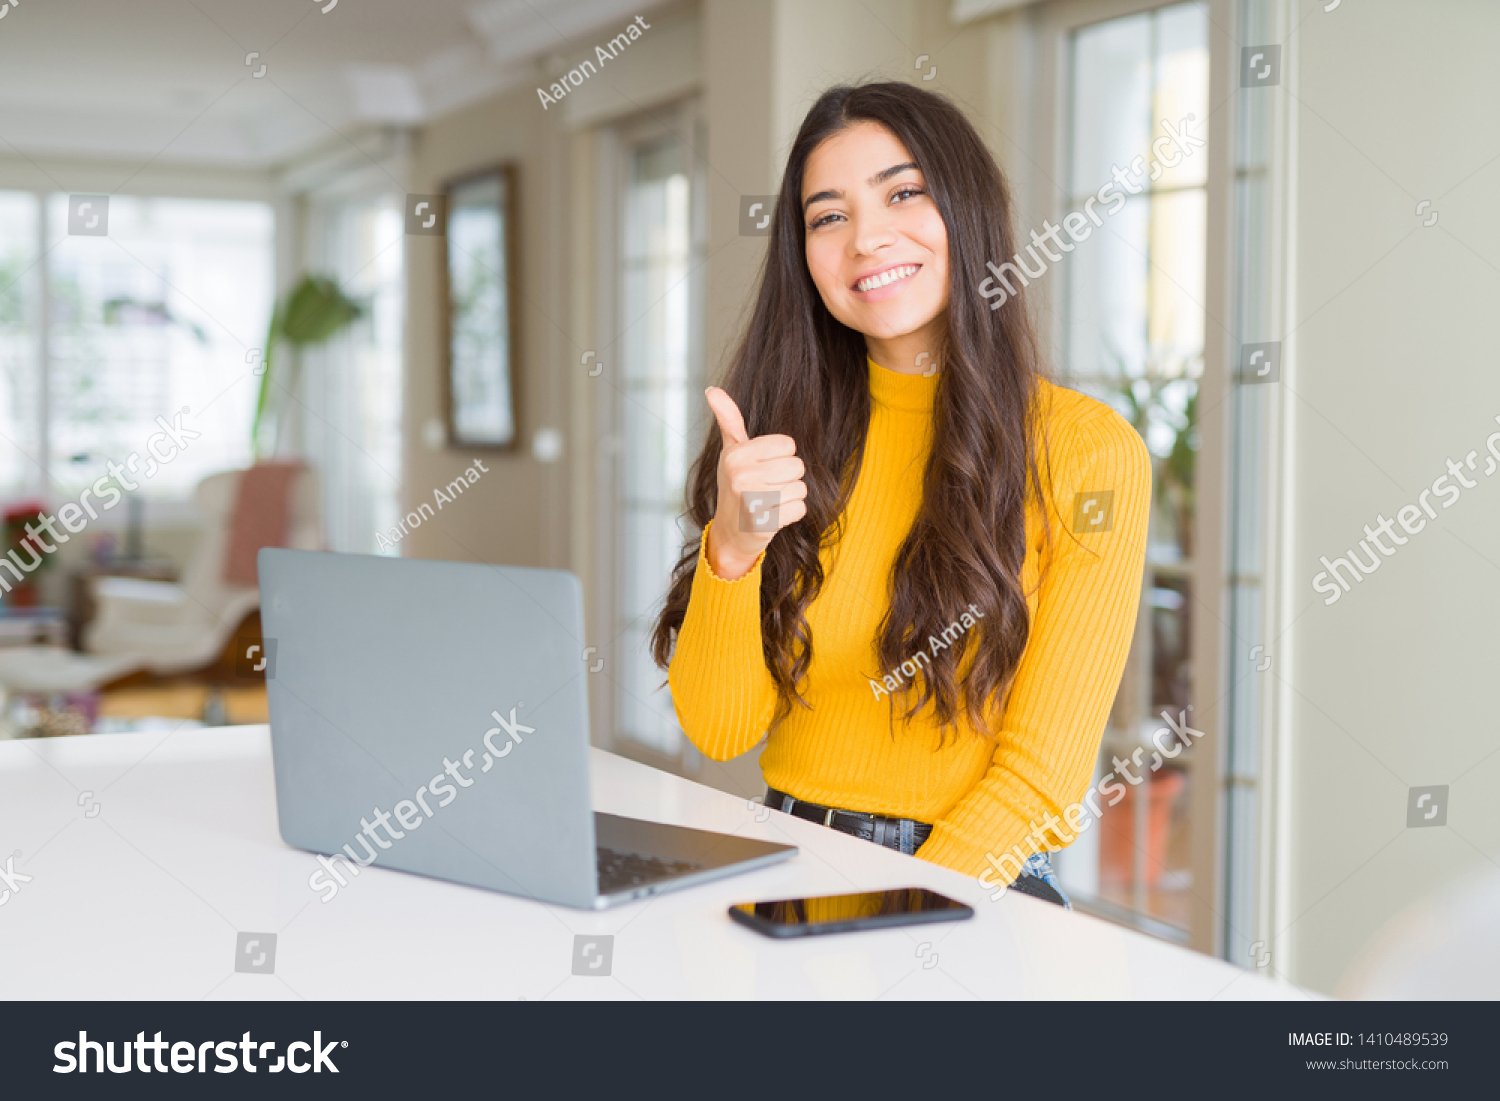 Young woman using computer laptop doing happy thumbs up gesture with hand. Approving expression looking at the camera with showing success. #1410489539